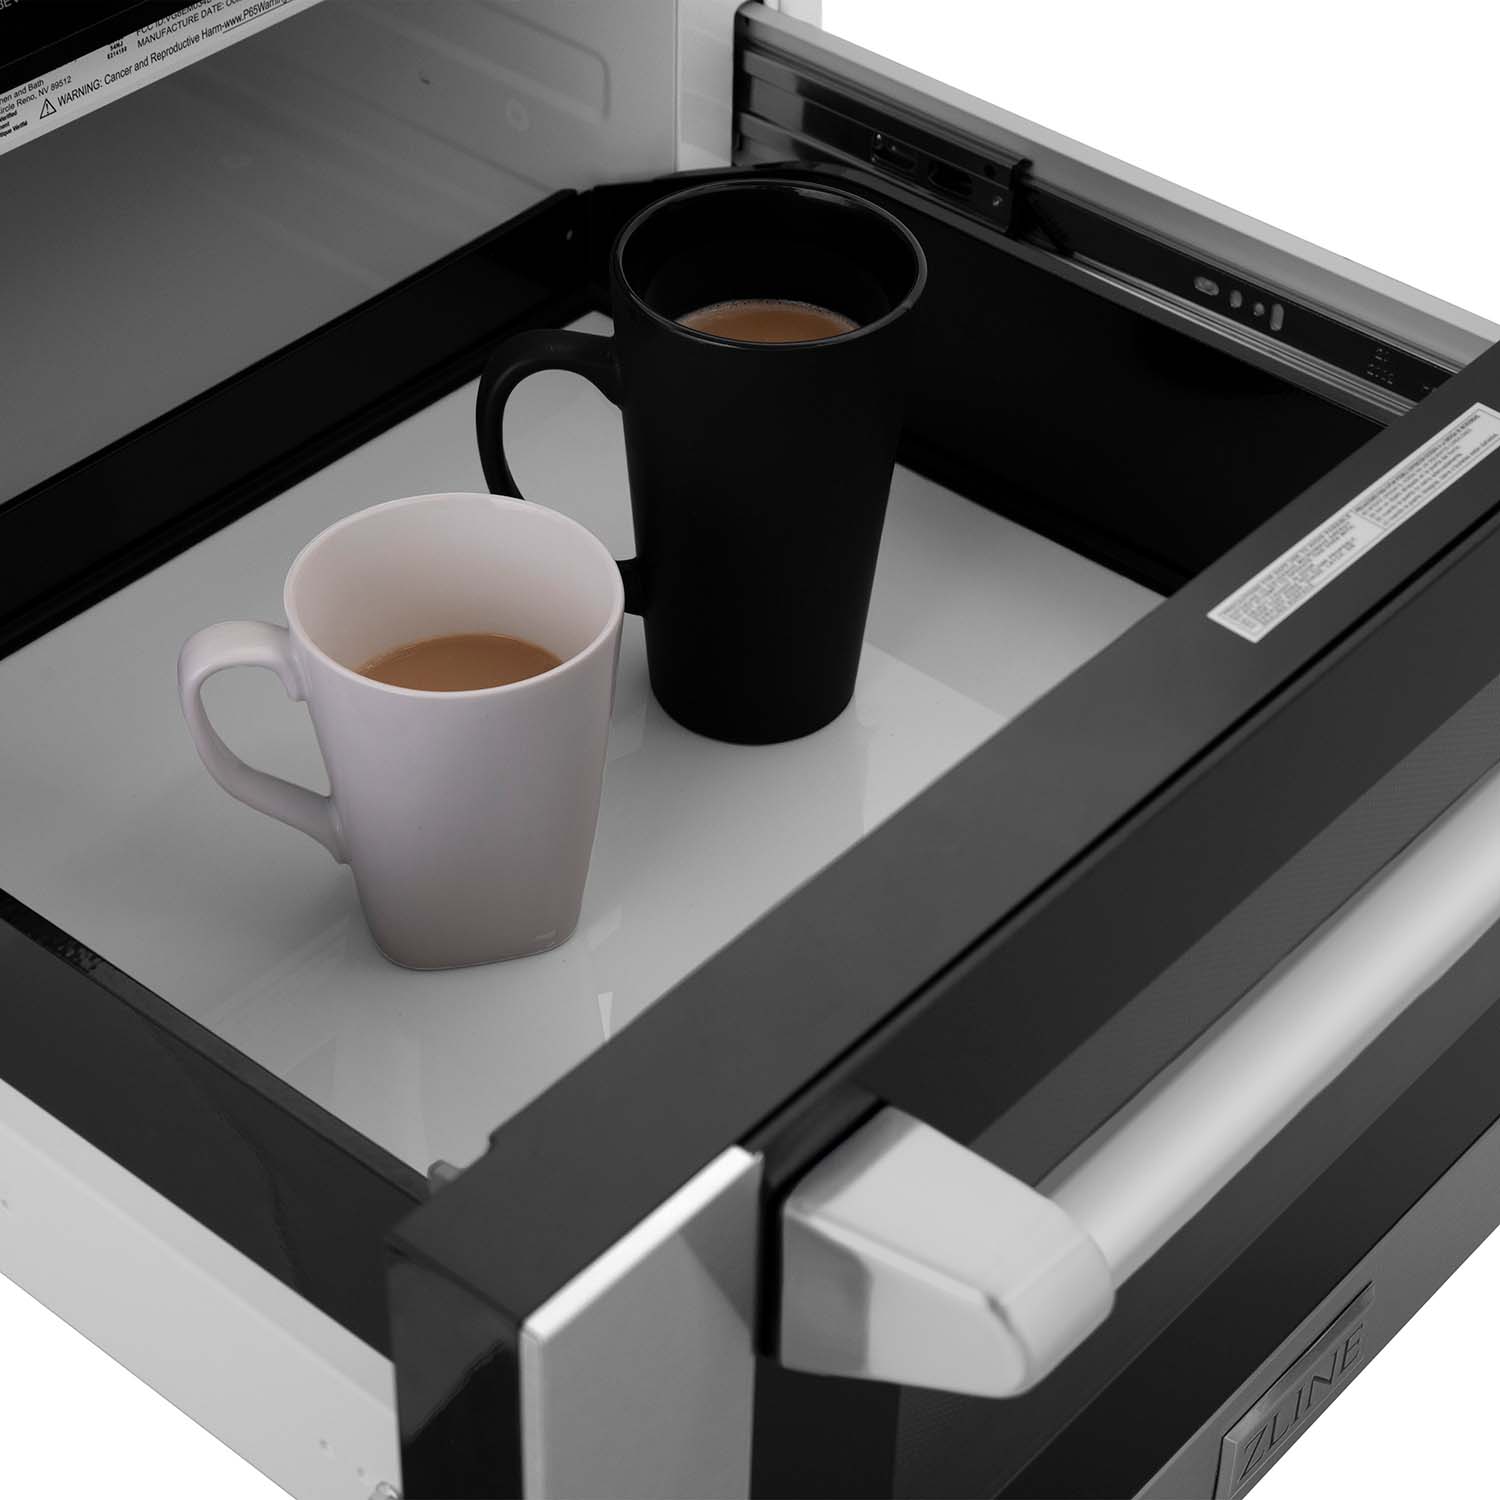 ZLINE microwave drawer with two cups of coffee inside.